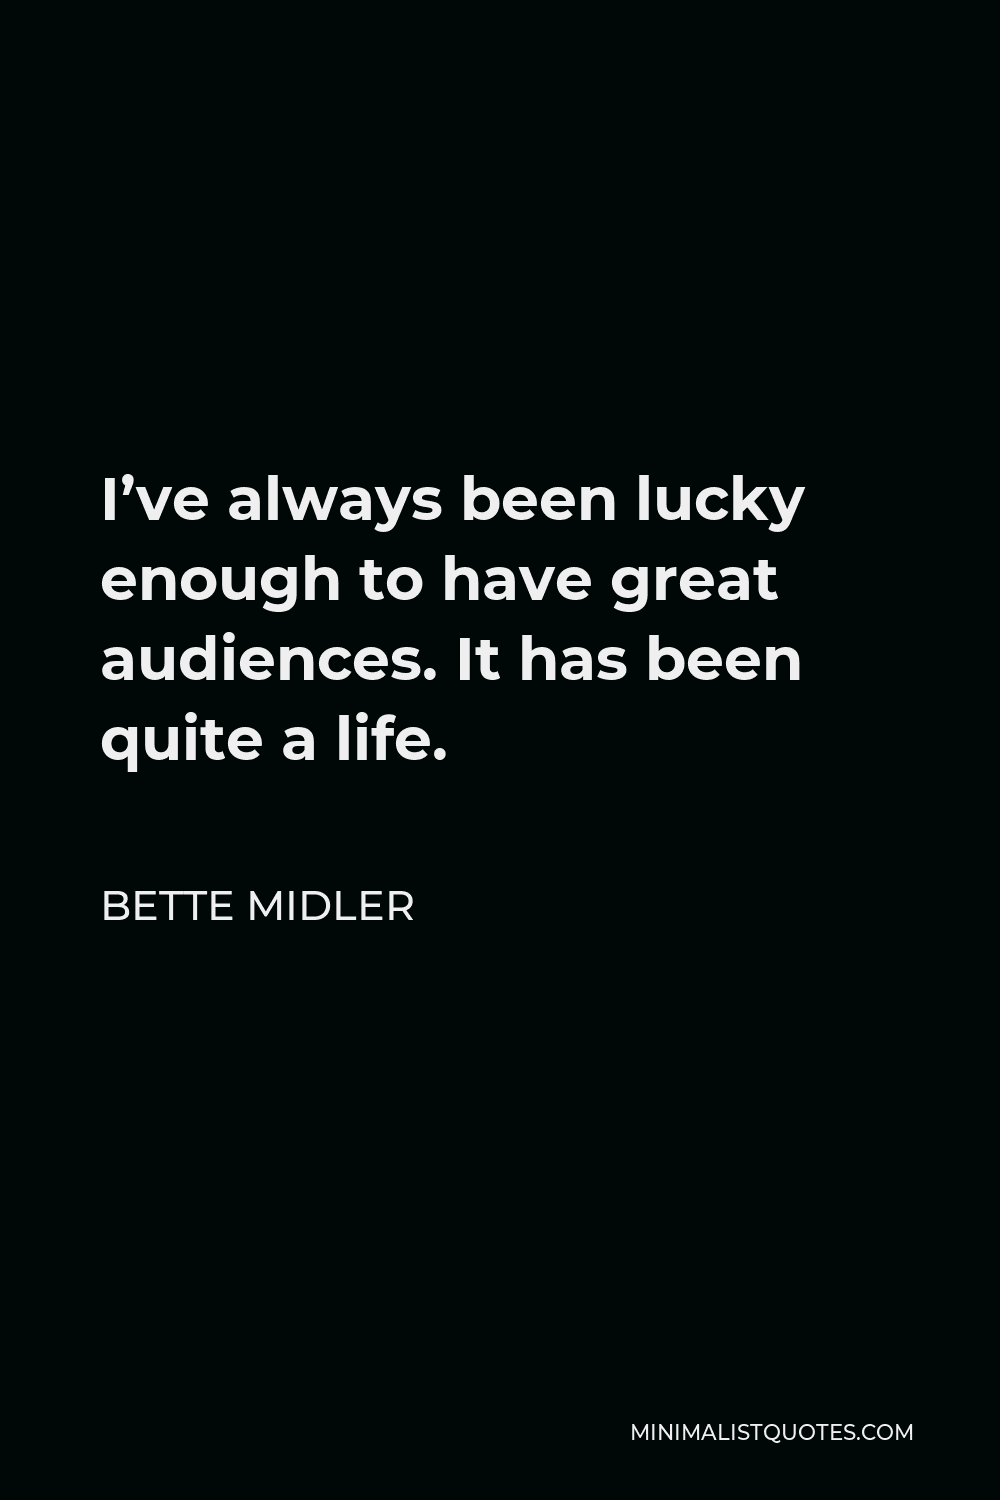 Bette Midler Quote - I’ve always been lucky enough to have great audiences. It has been quite a life.